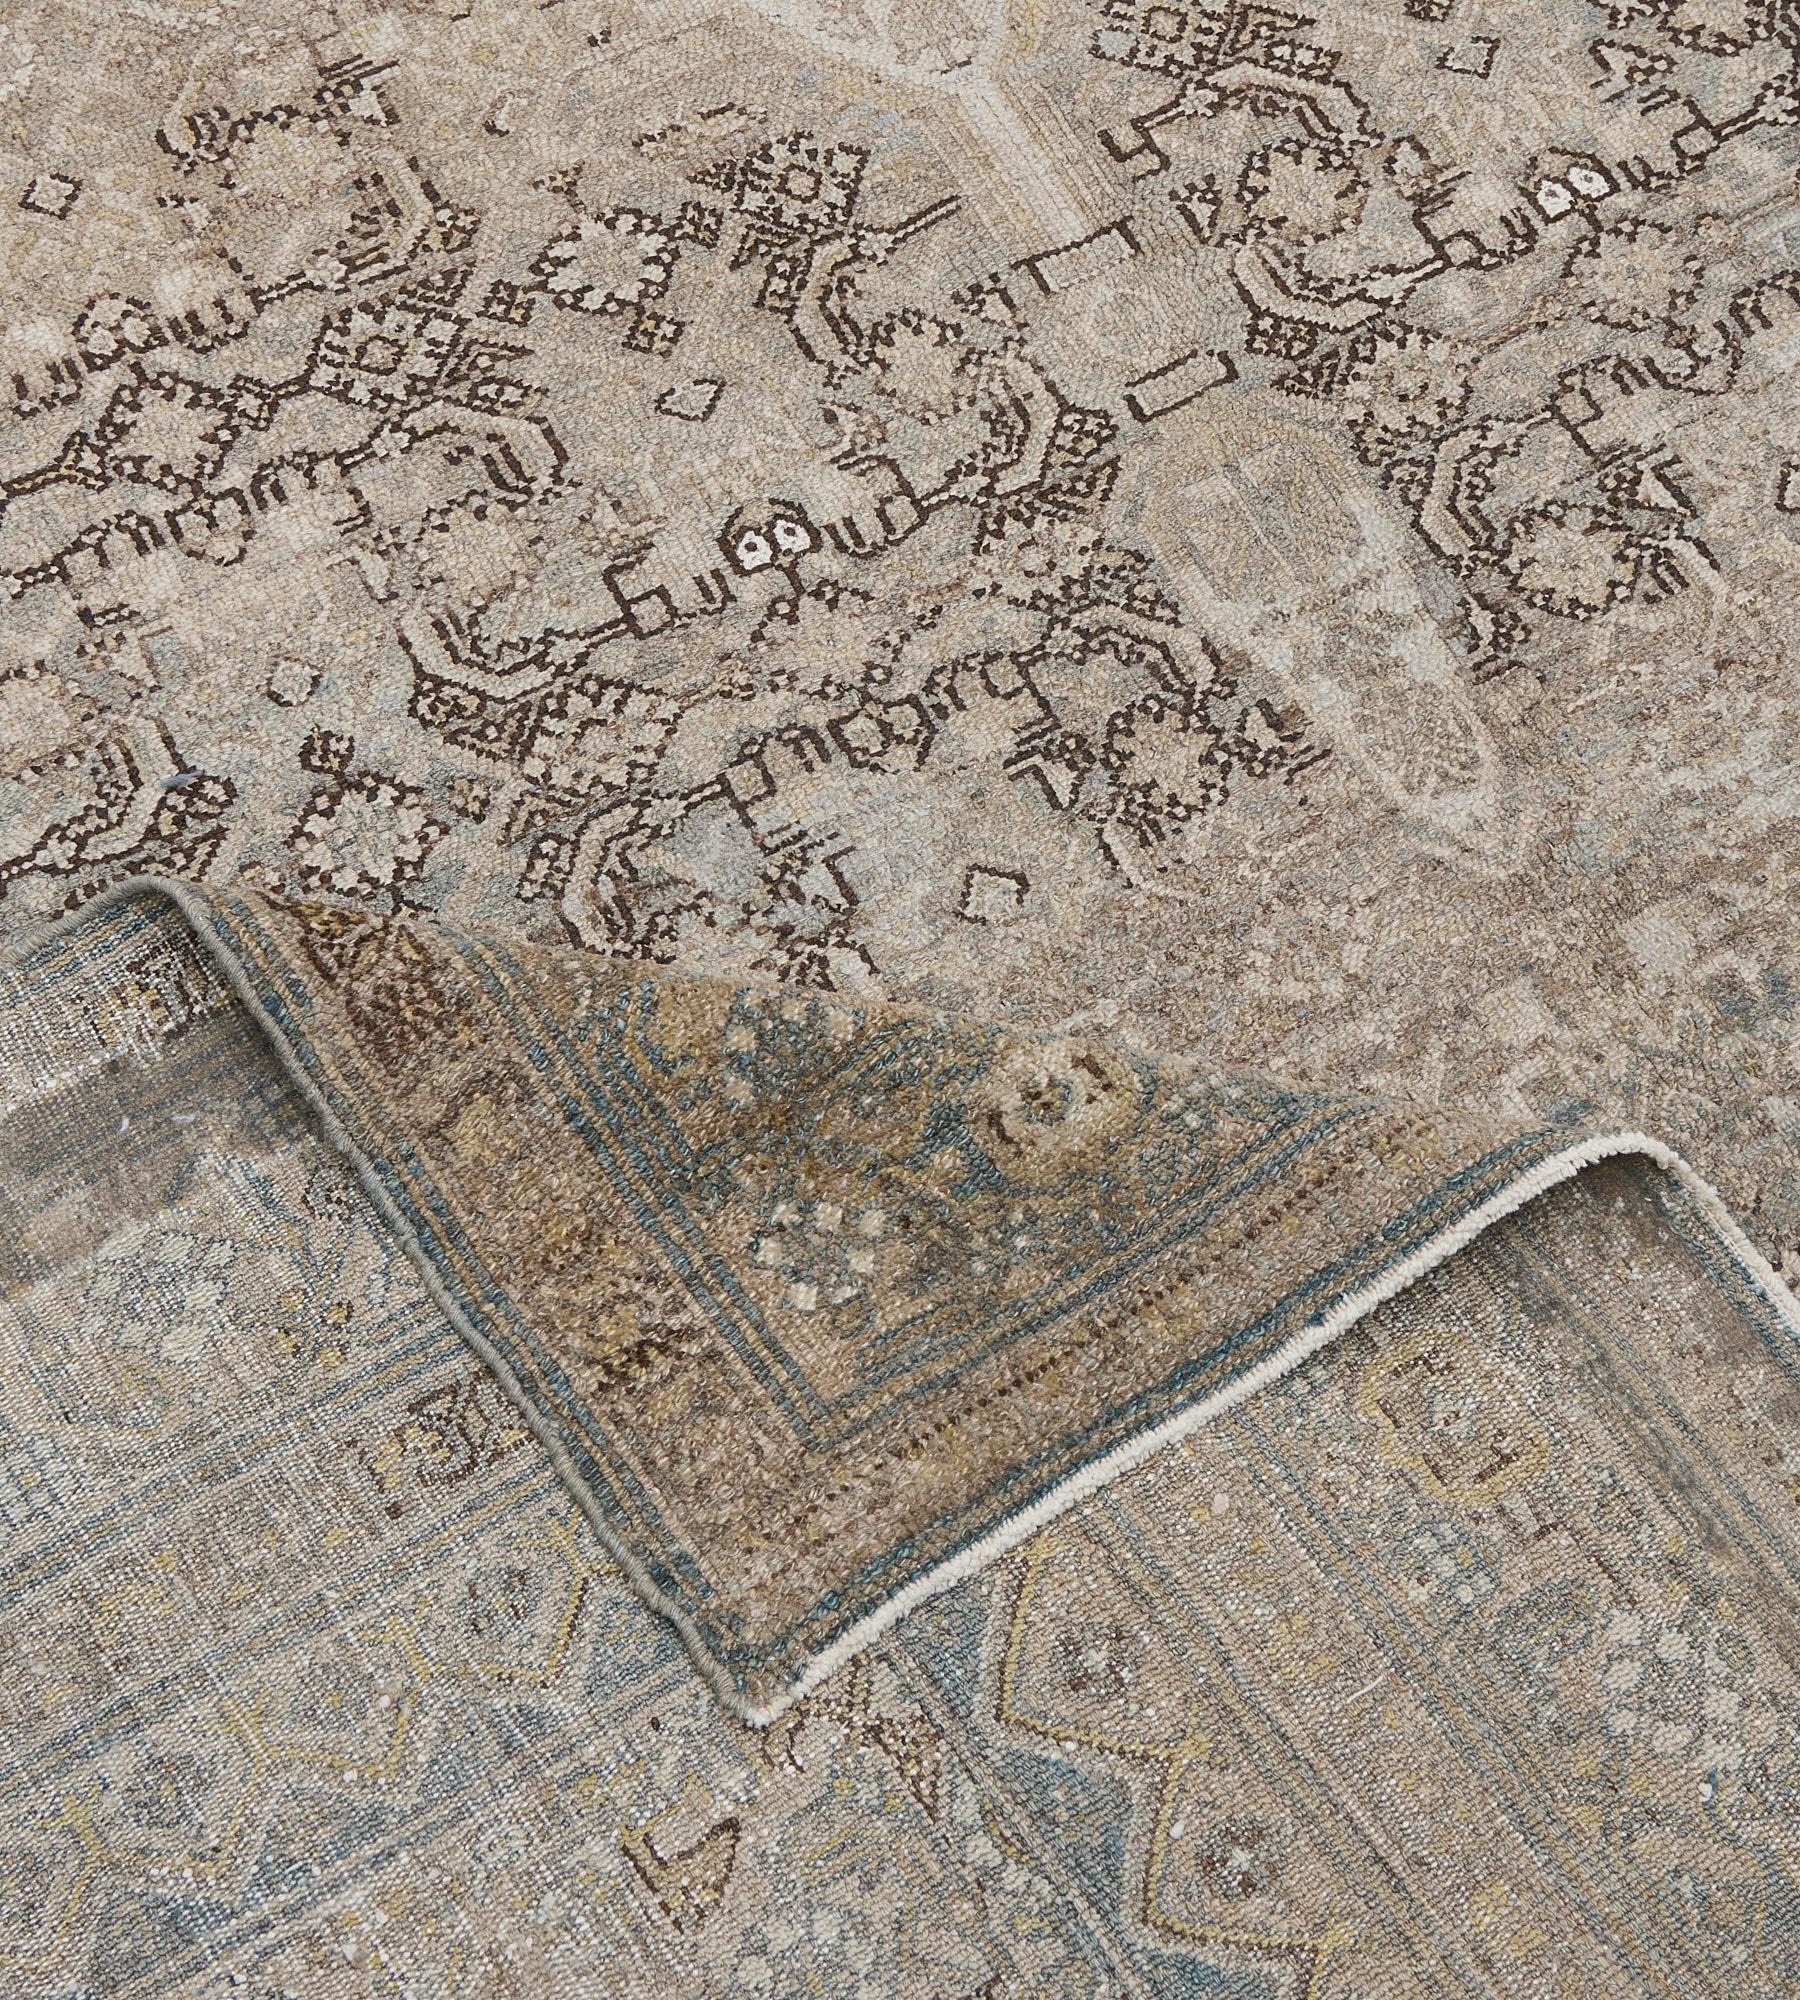 Antique Wool Hand-Knotted Persian Serab Runner Large Size - 8'x23' For Sale 7